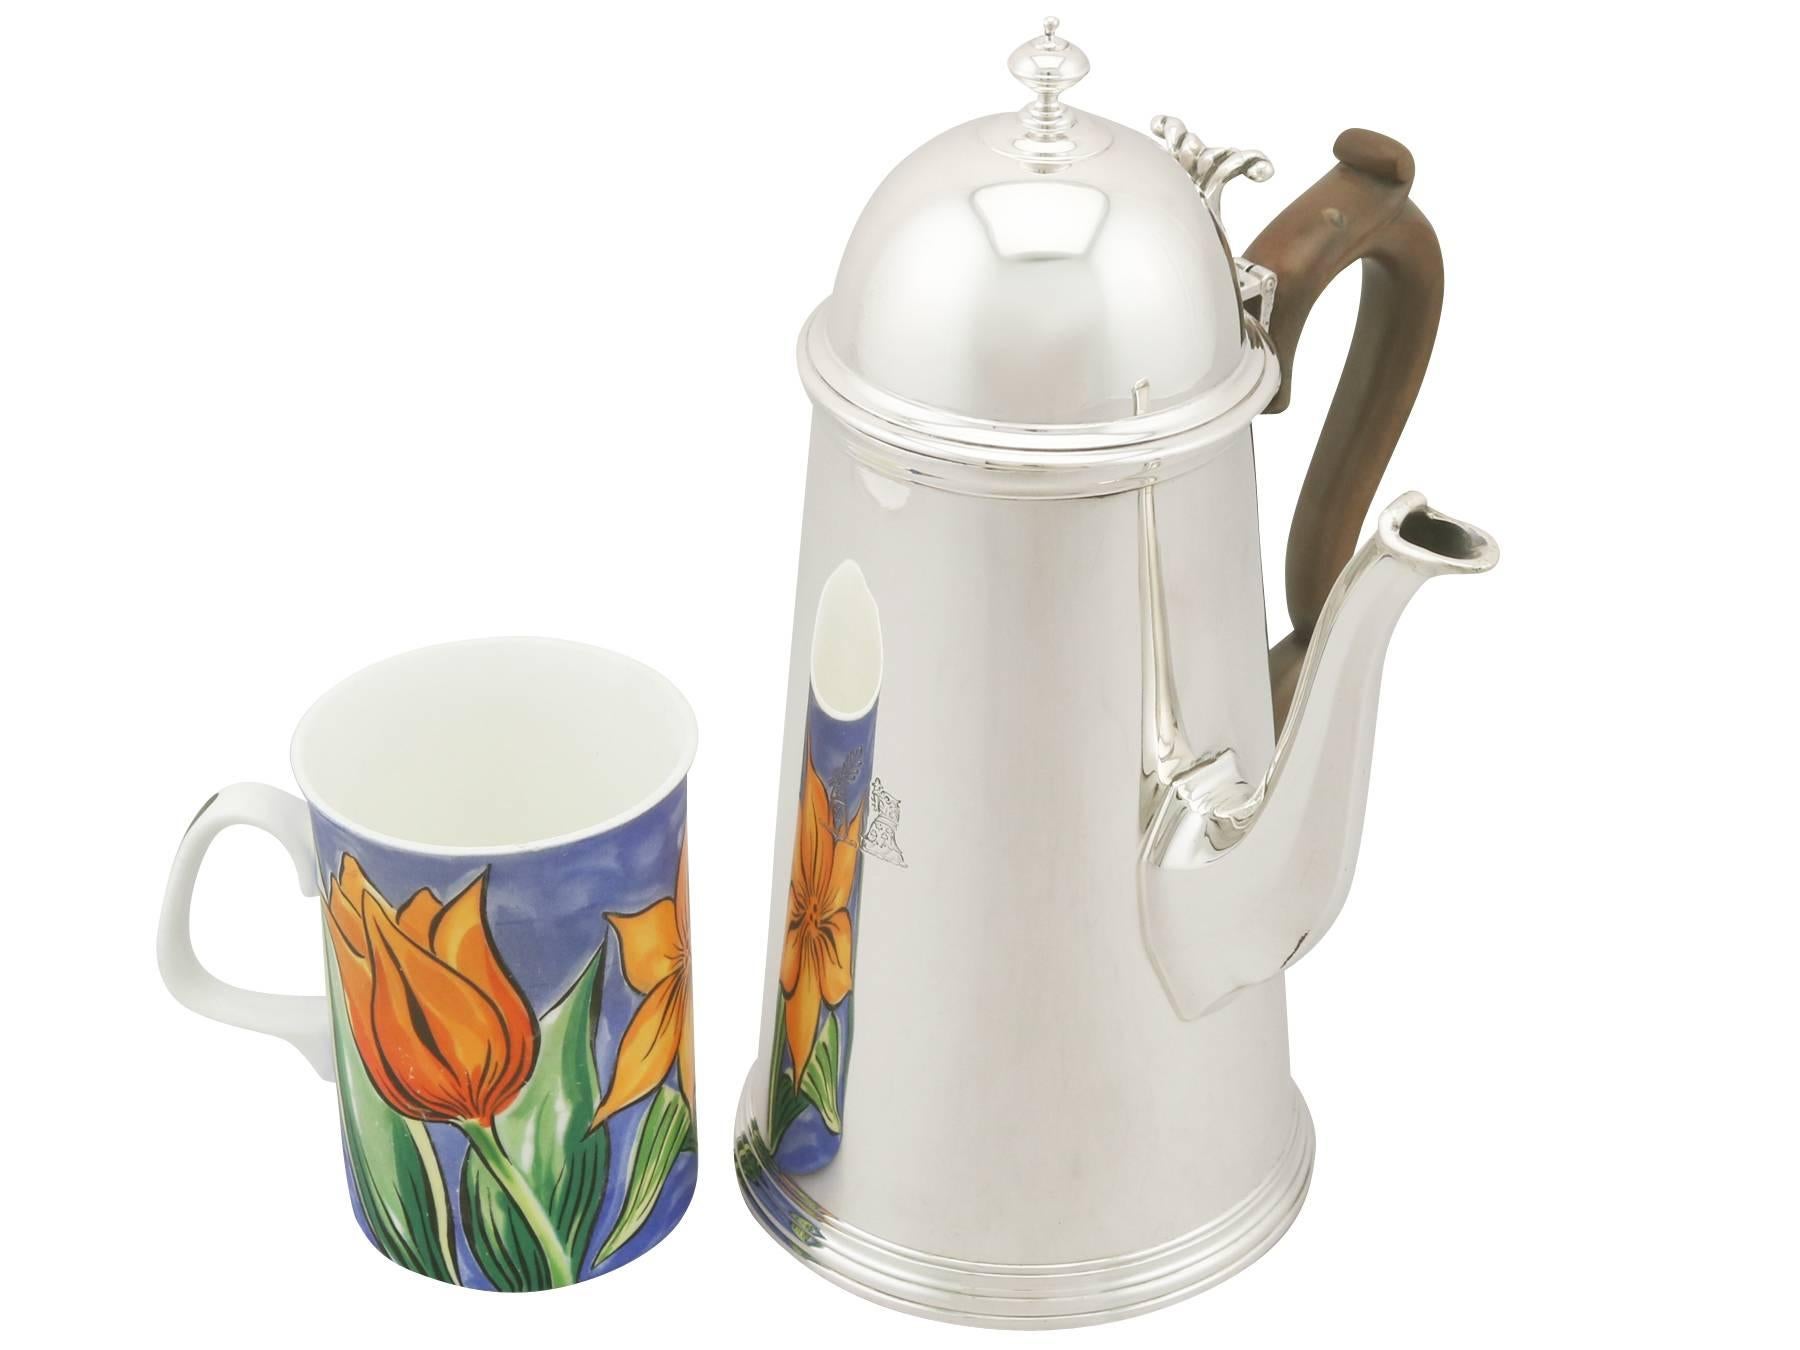 This exceptional antique Edwardian sterling silver coffee pot has a plain tapering cylindrical form on to a circular collet foot, all in the classic George I style.

The surface of this fine example of Edwardian silverware is plain and embellished